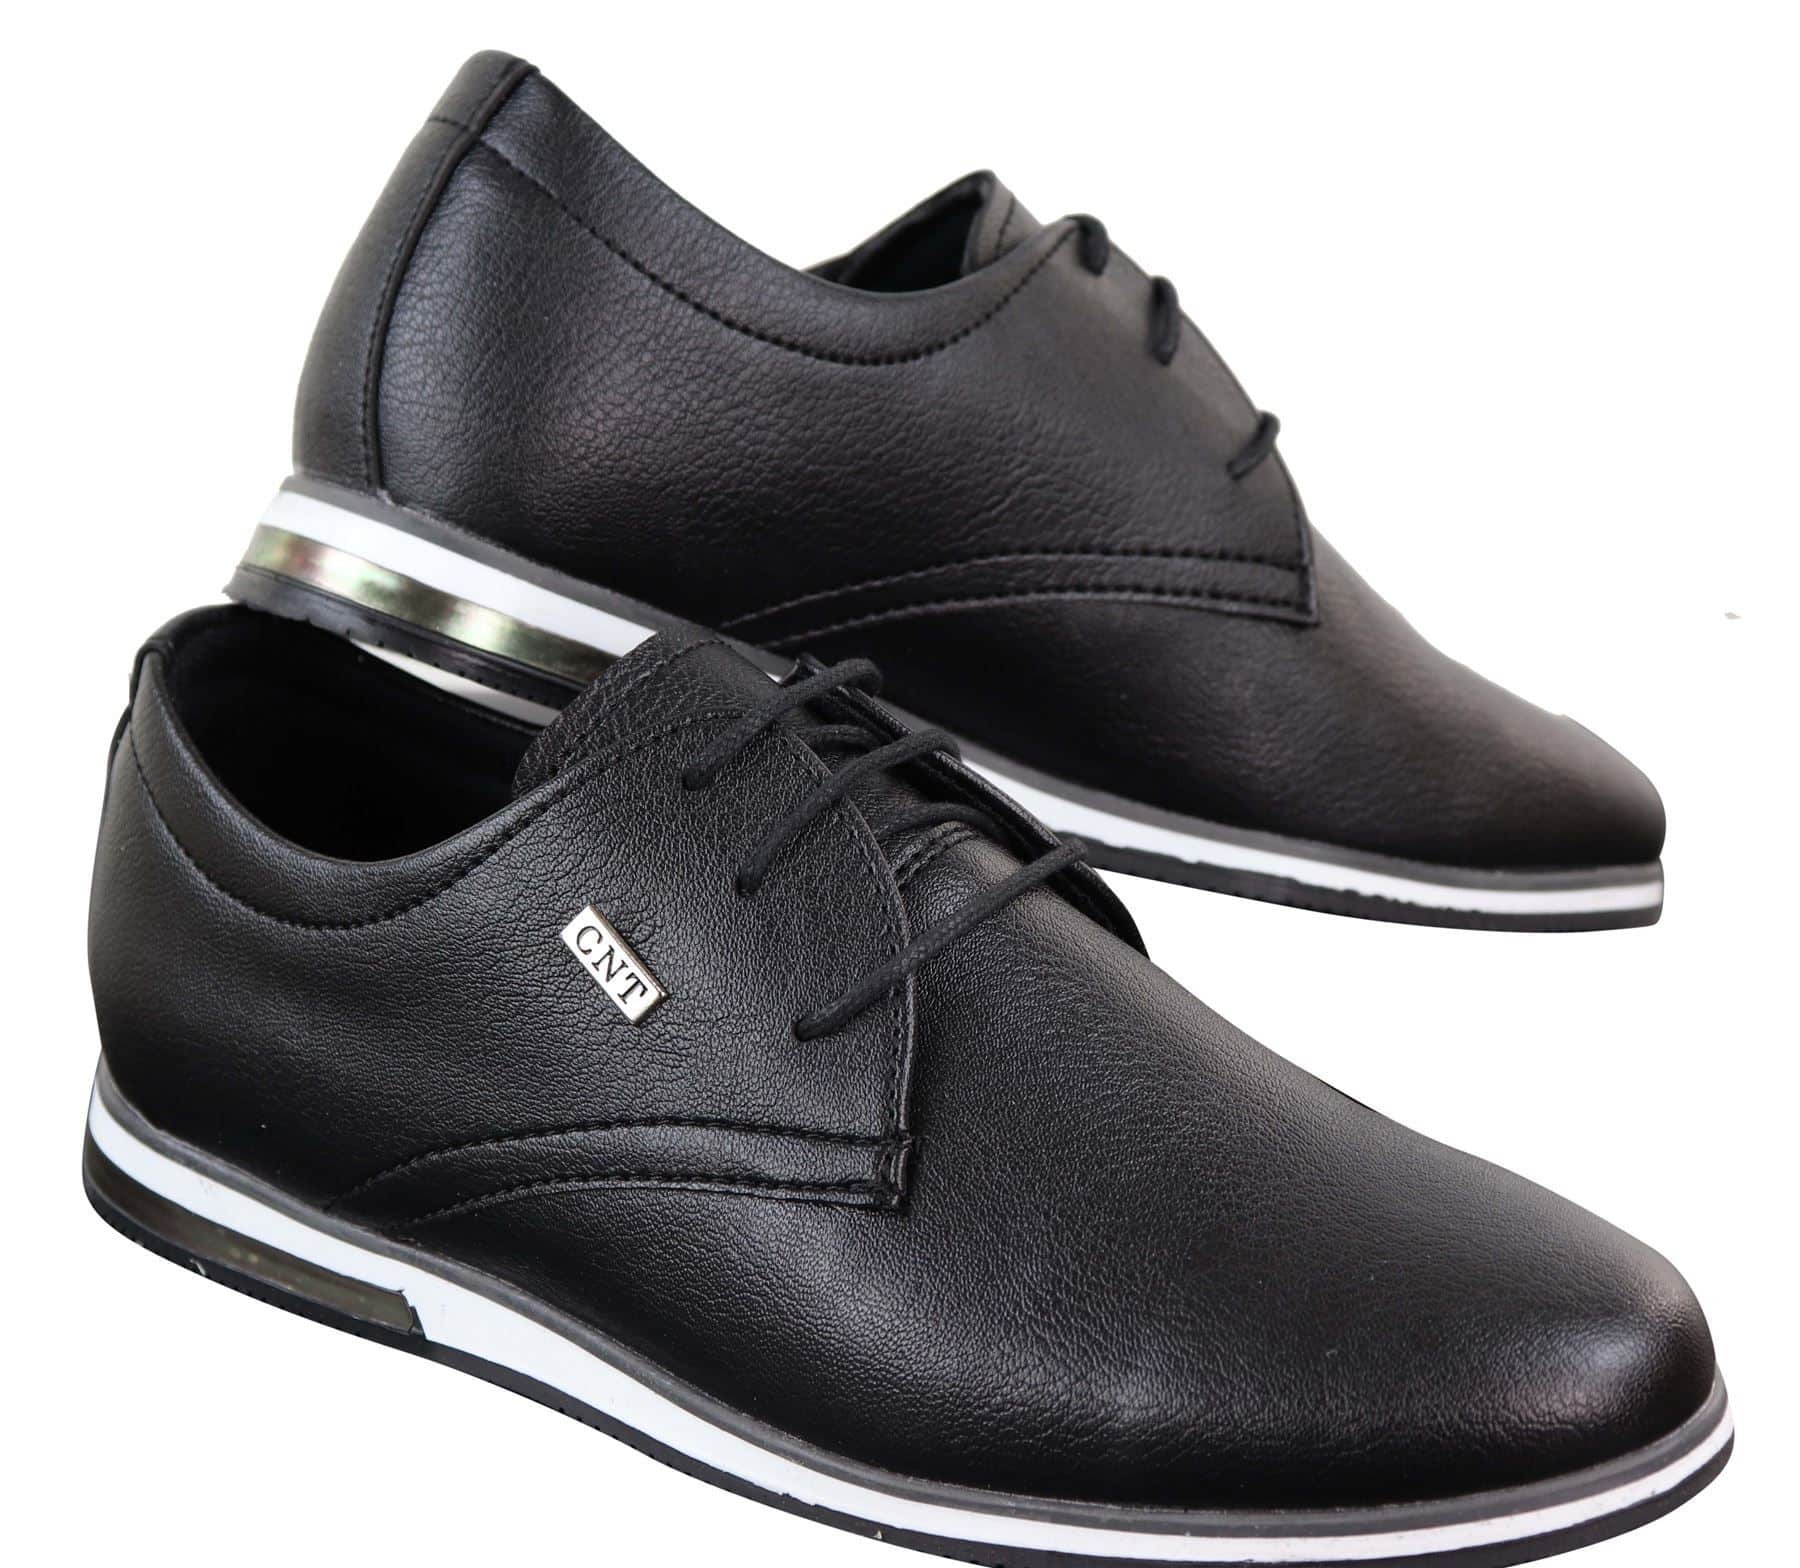 Mens PU Leather SmartCasual Shoes Happy Gentleman